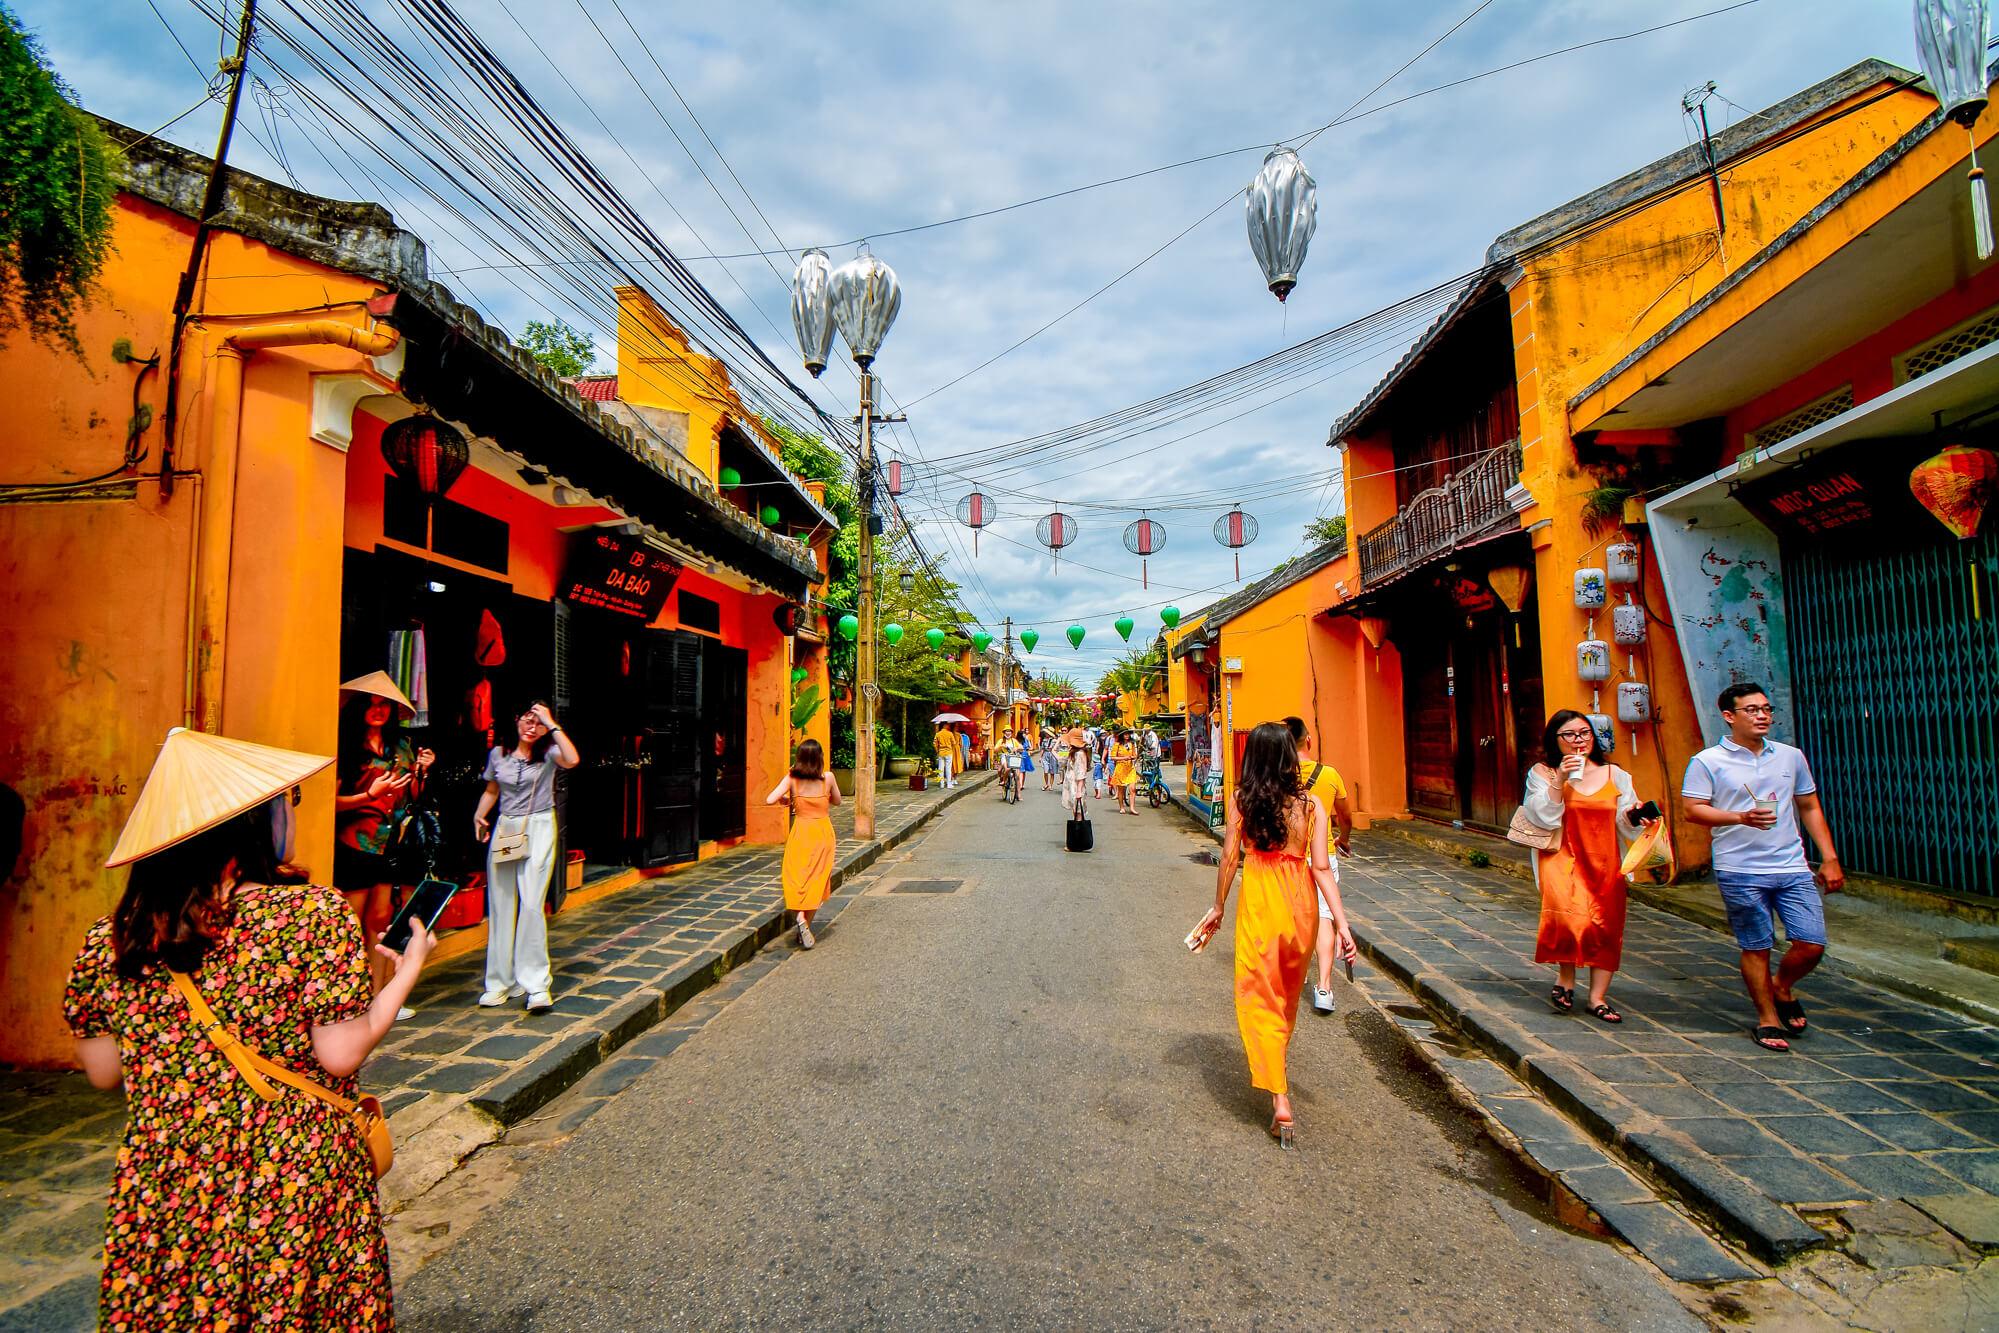 Hoi An ancient town - a must-see place in Vietnam